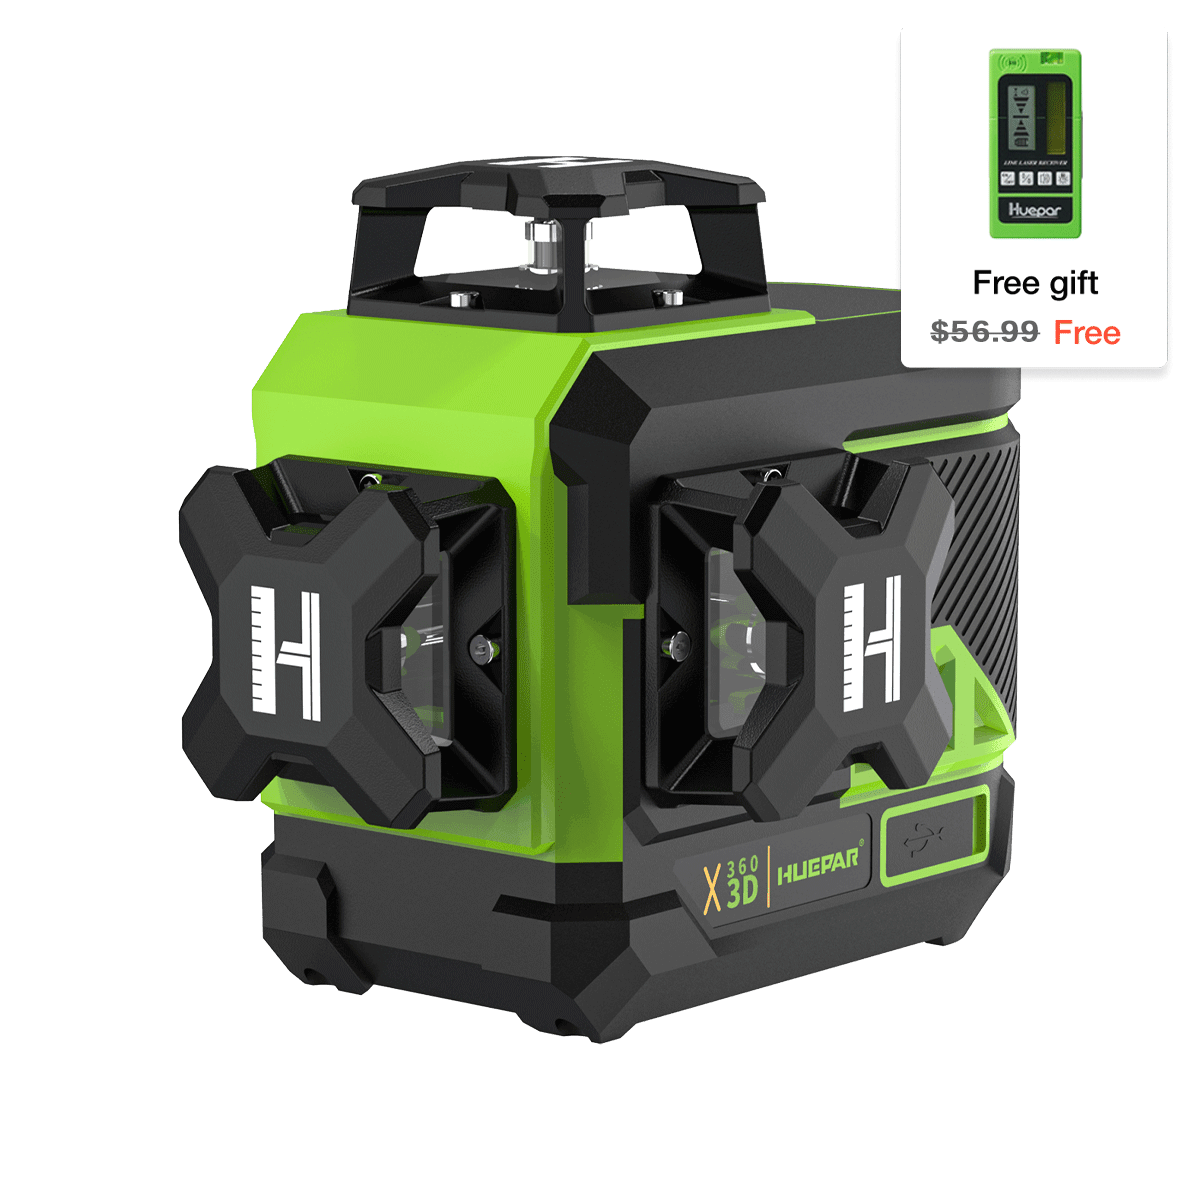 Huepar Z03CG - 3D Green Beam 12 Lines Laser Self Leveling Levels with Bluetooth & Remote Control.